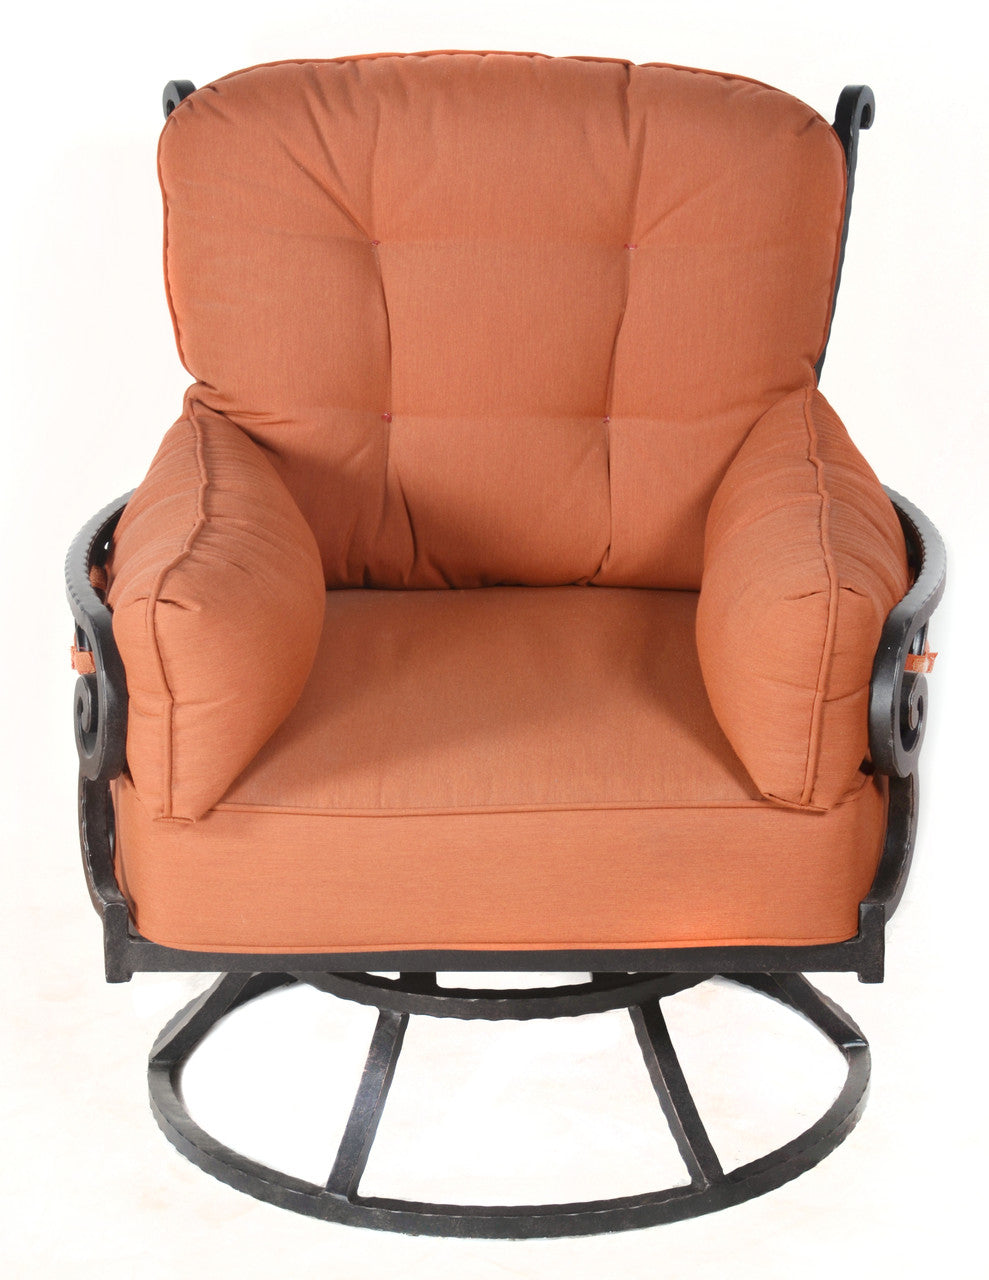 AFD Home Chillounger Swivel Chair 11170110